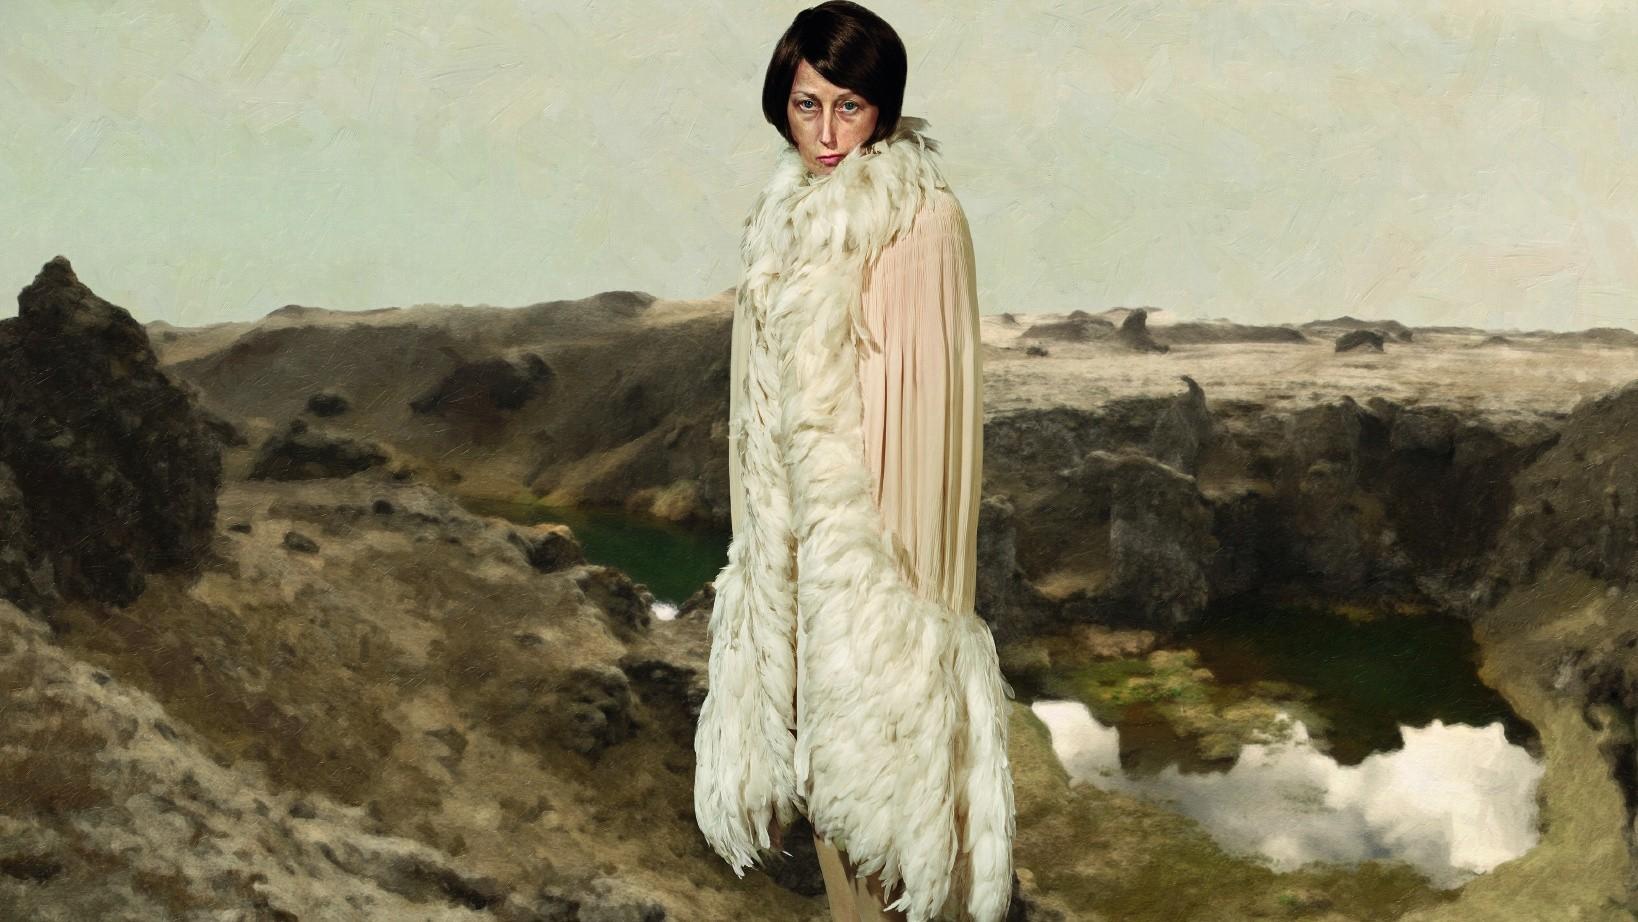 A digitized landscape replaces rear-screen projection to create a sense of location in this detail from a 2010/11 Cindy Sherman portrait of a silent screen star.